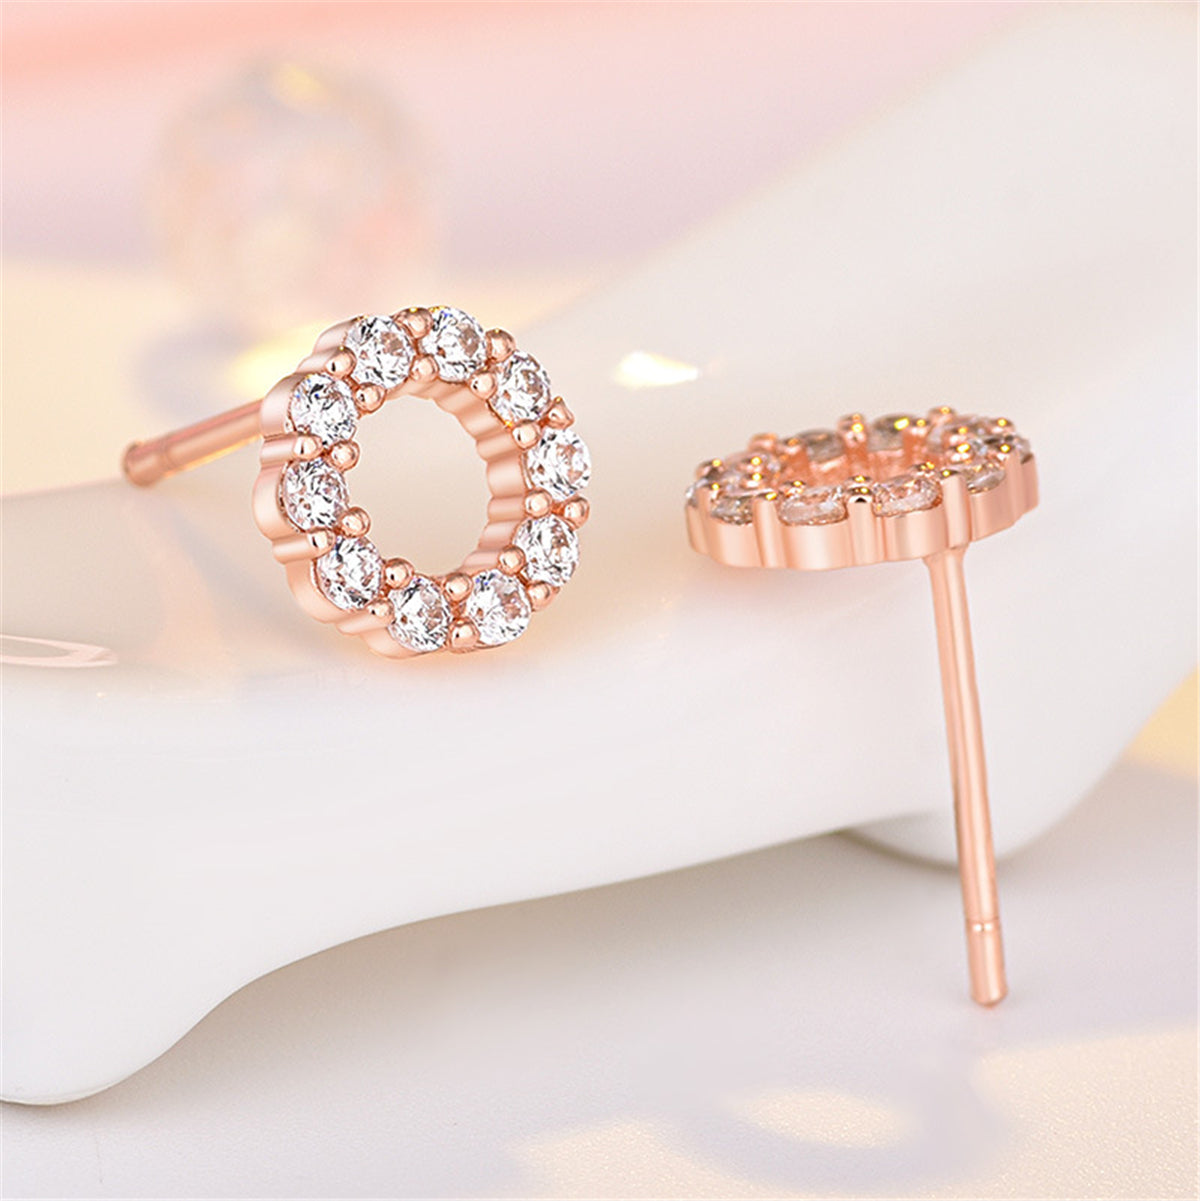 Cubic Zirconia & 18K Rose Gold-Plated Circle Stud Earrings